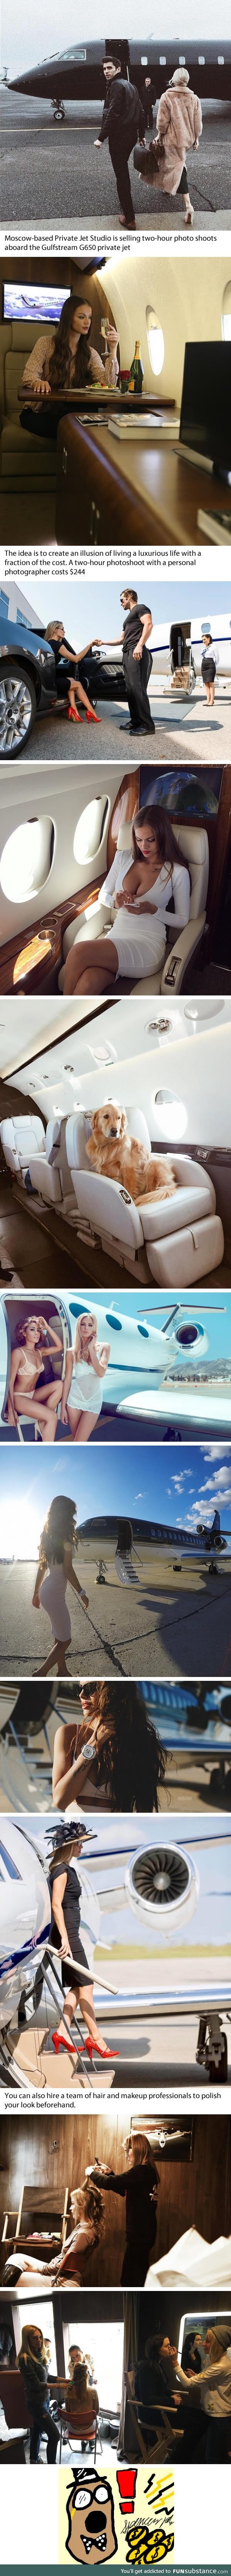 Russian company lets you fool your followers by renting out private jets for photoshoots